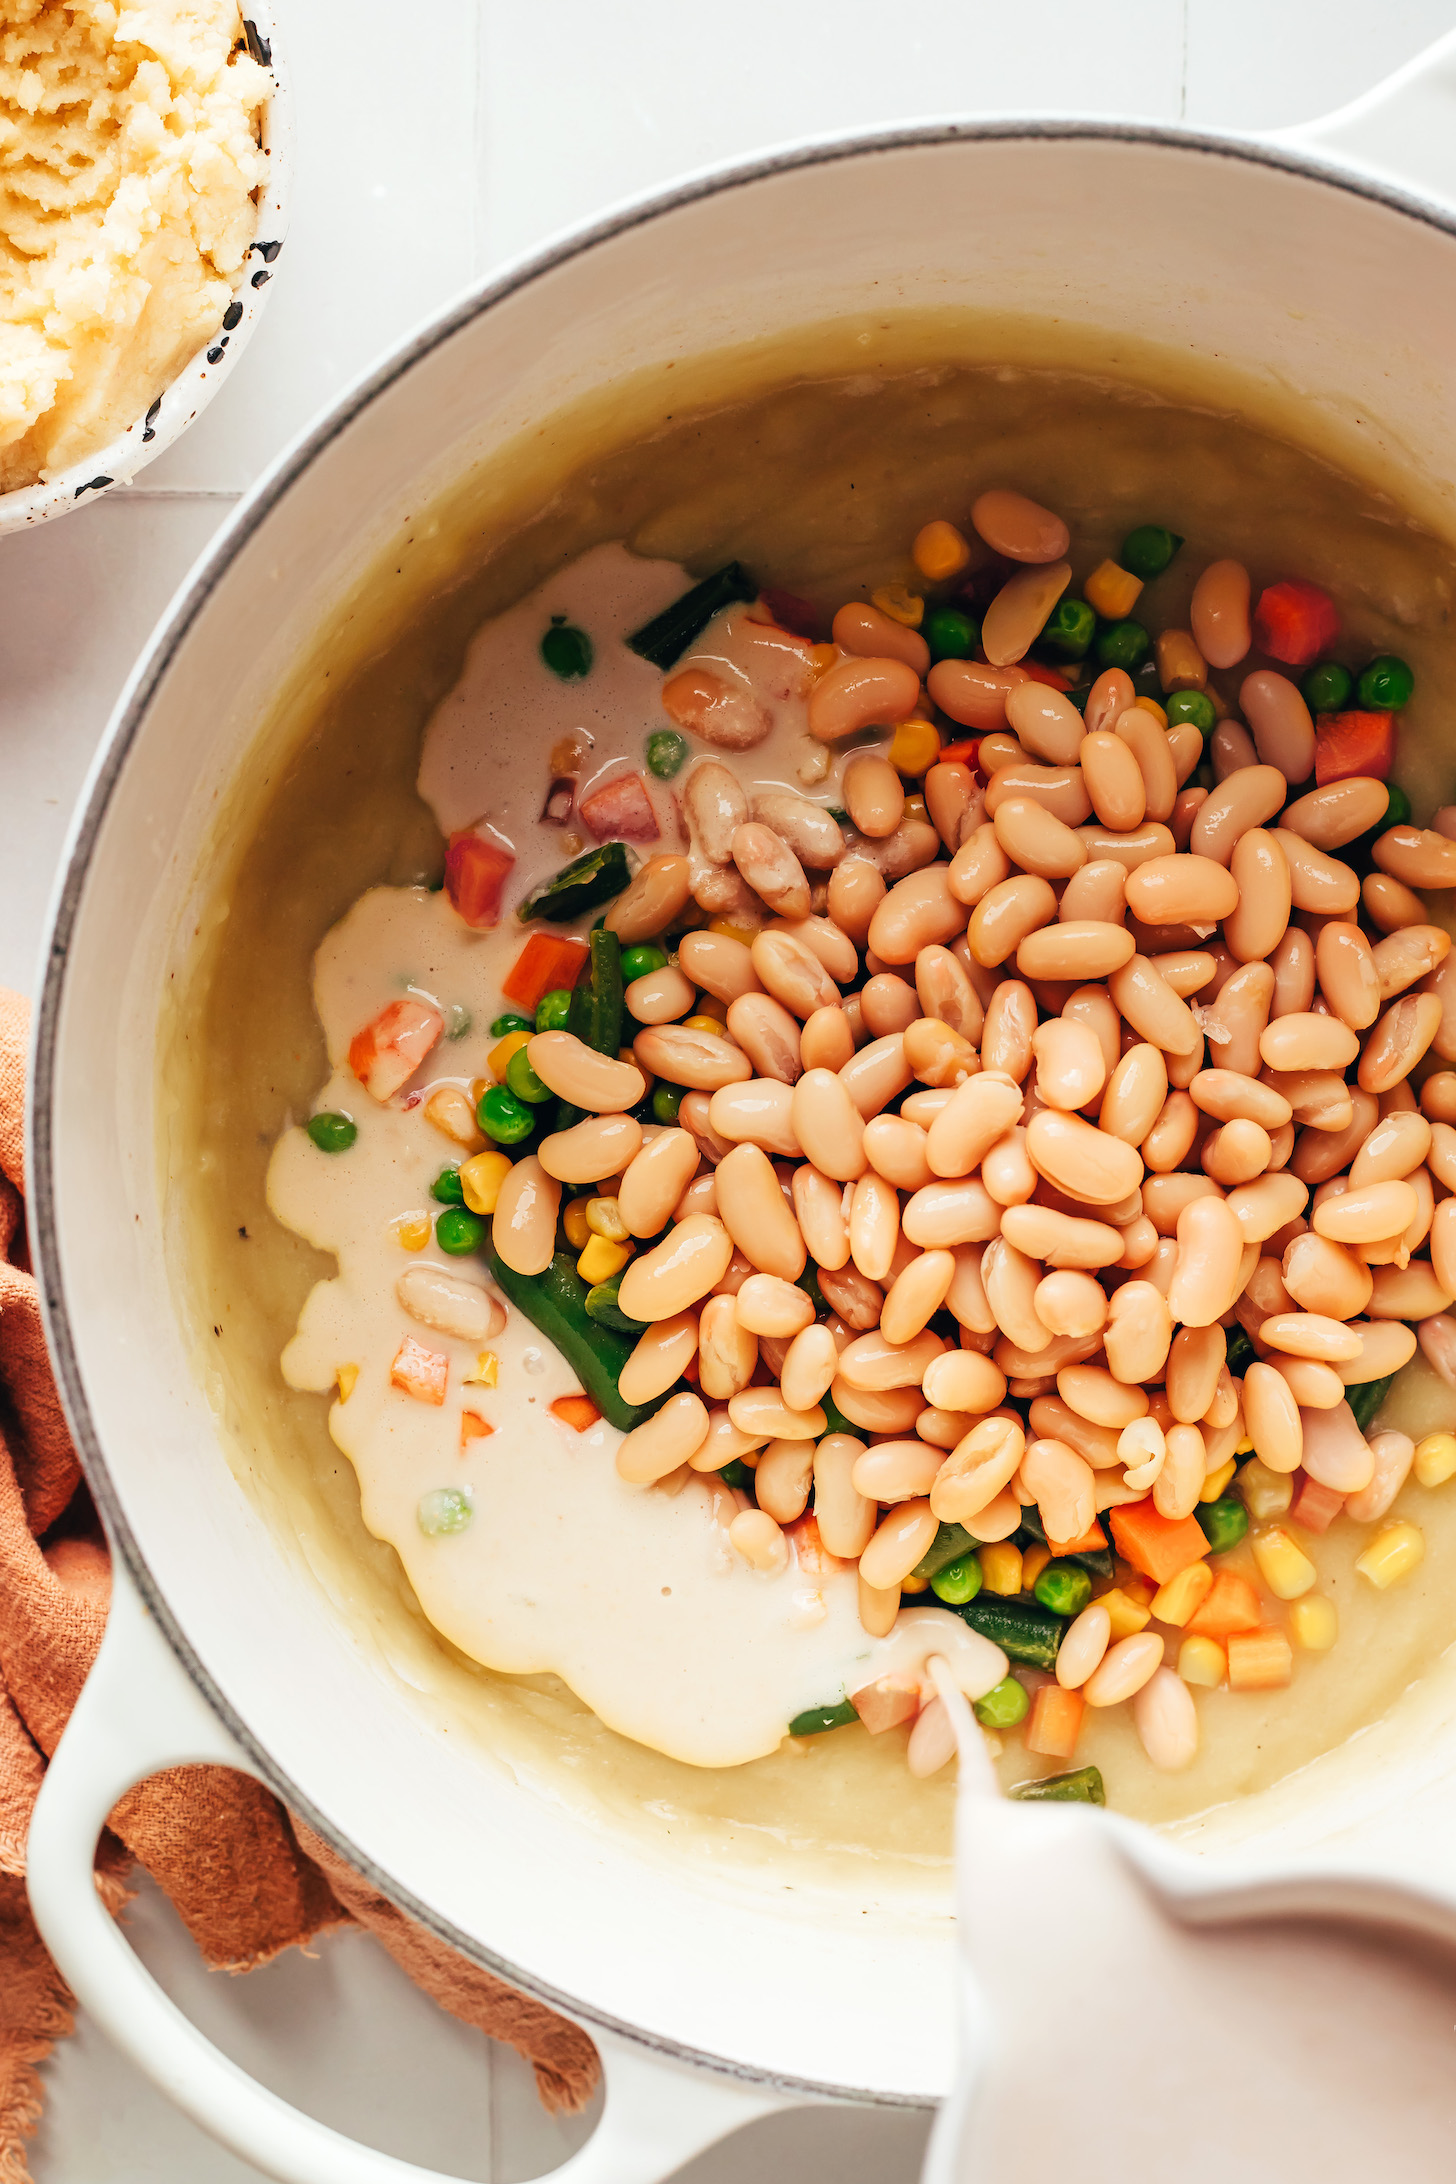 Pouring creamy cashew milk over mixed vegetables and white beans